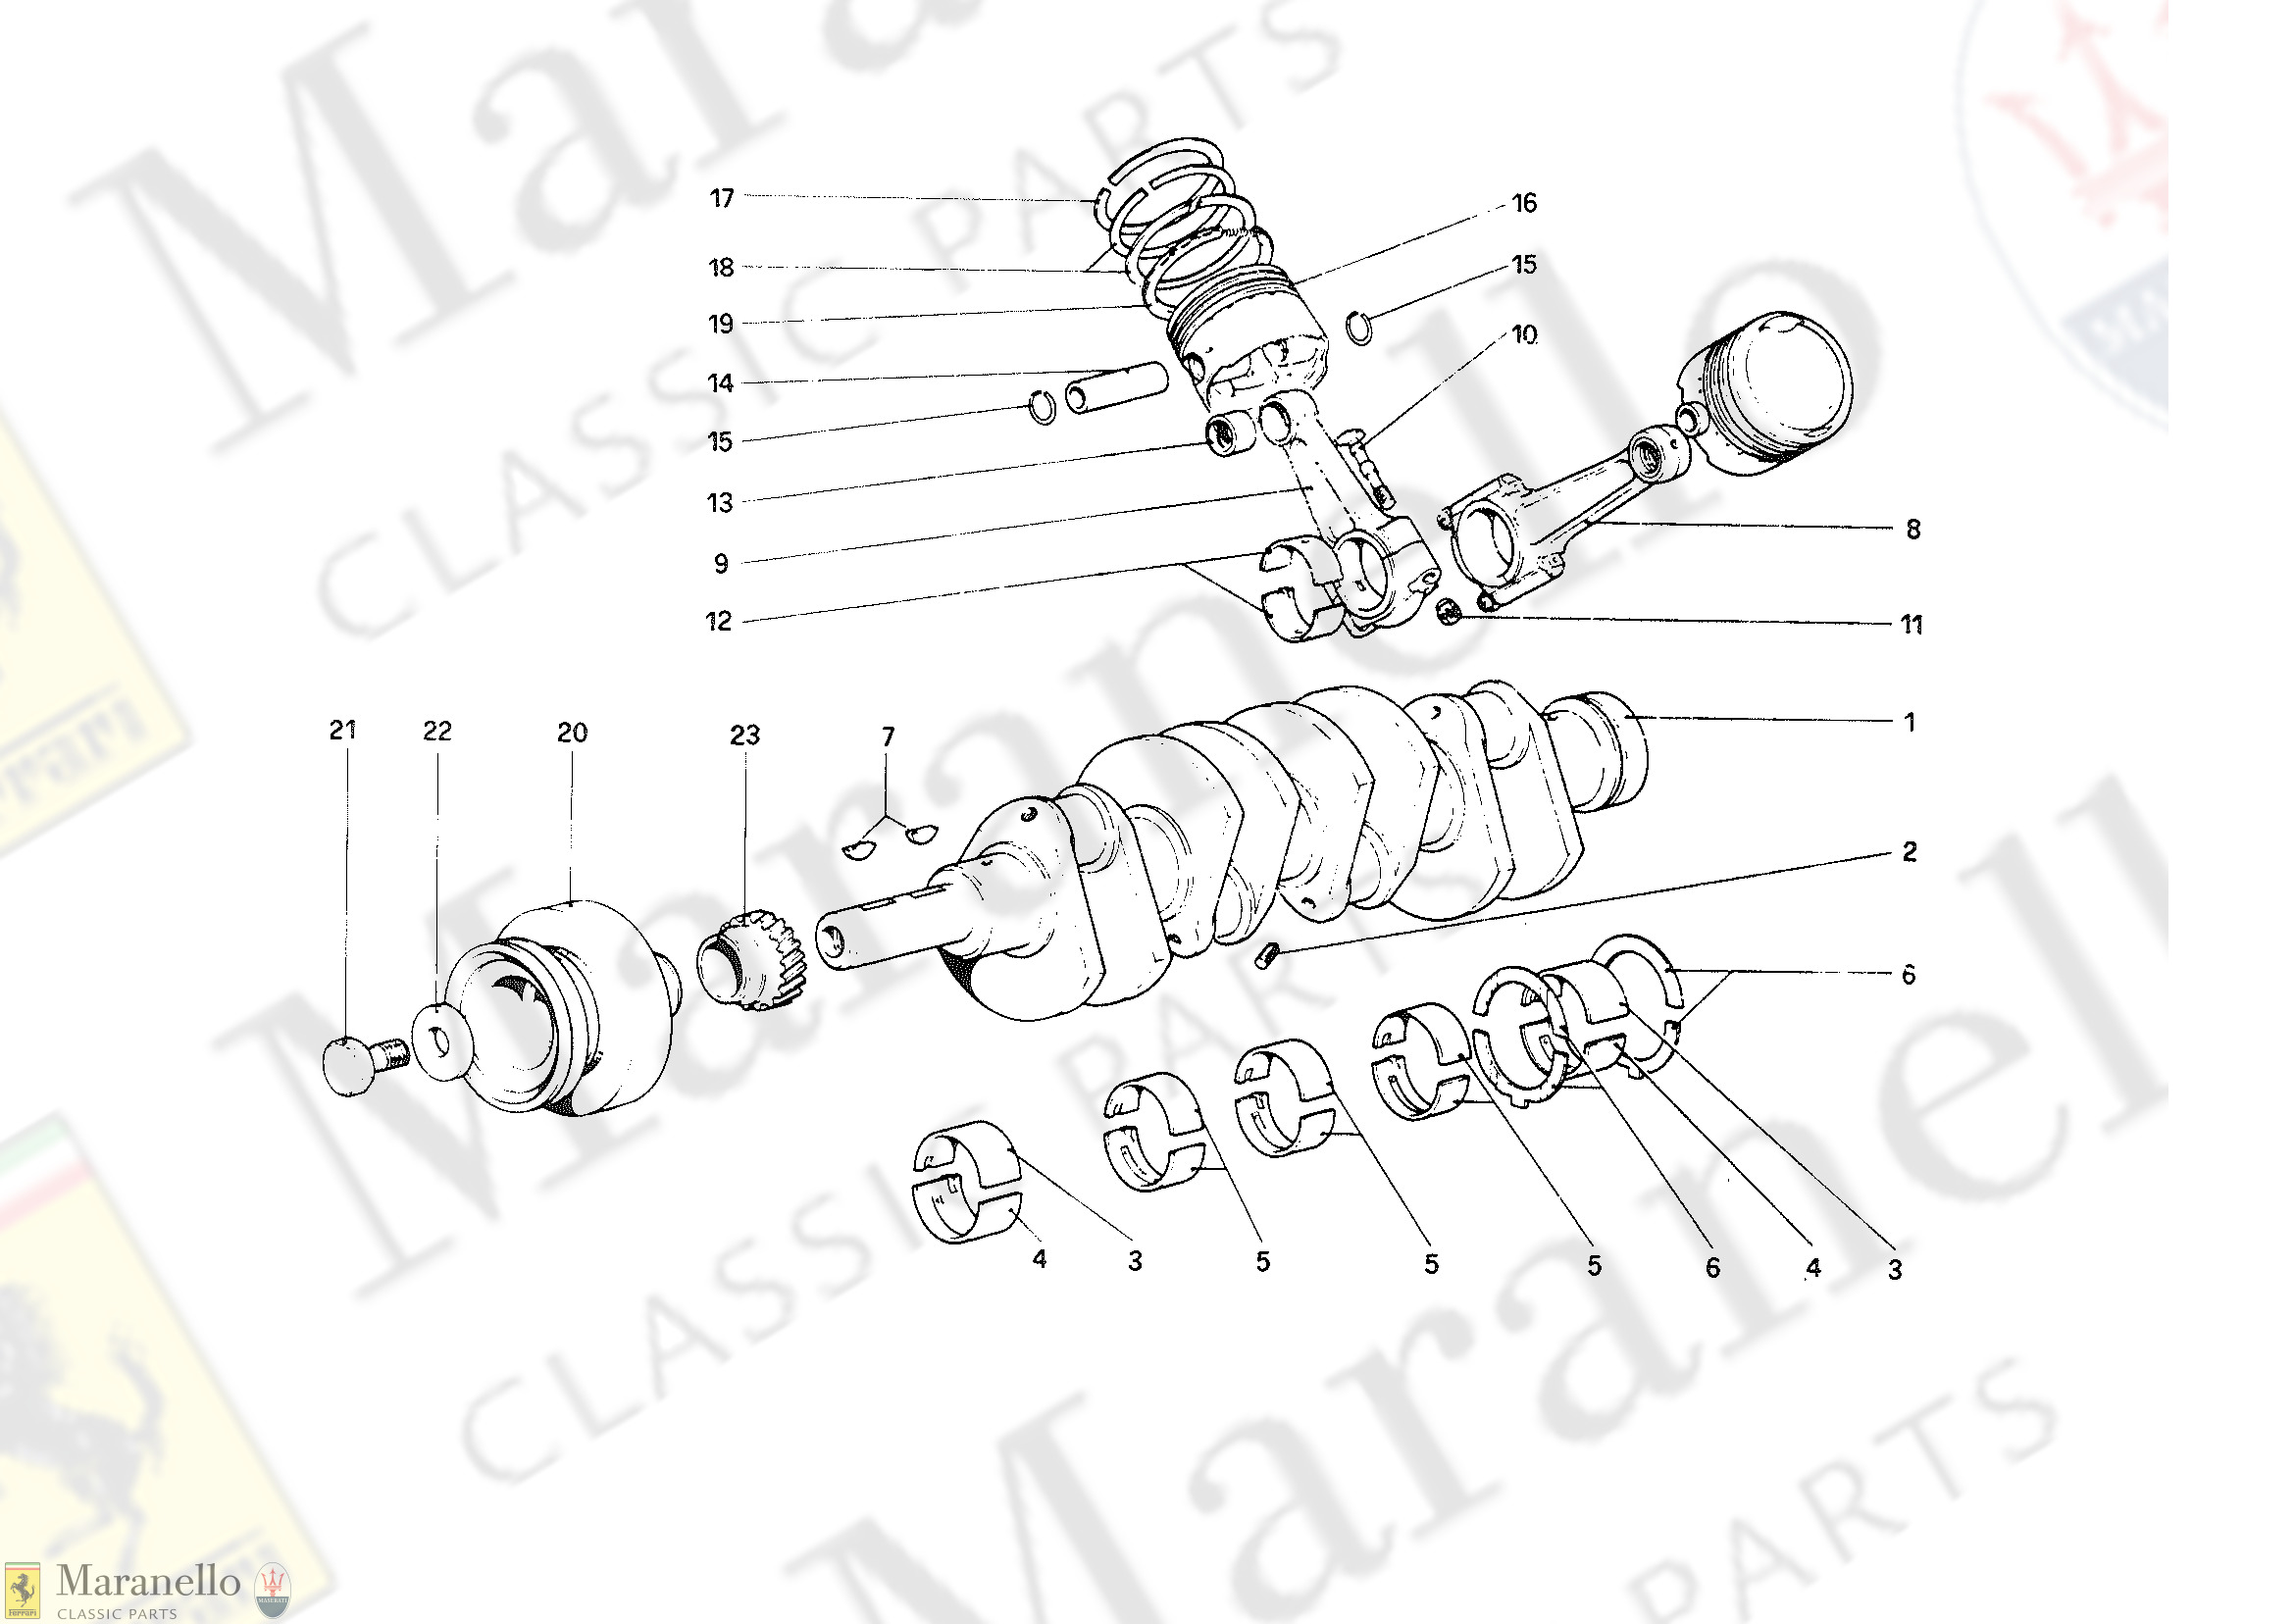 003 - Crankshaft - Connecting rods and pistons